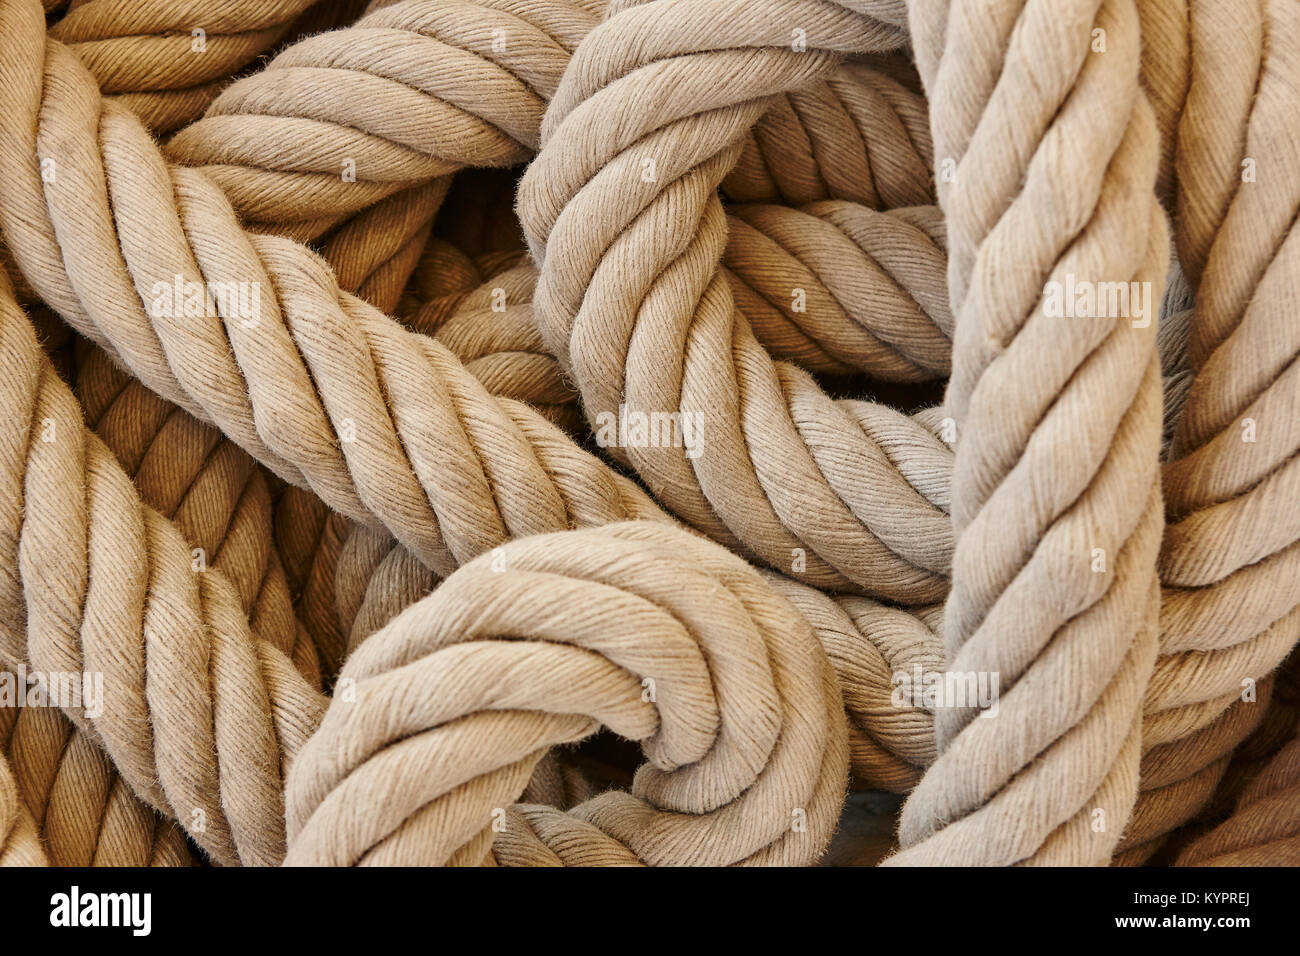 Thick rope with loops. Marine background. Horizontal Stock Photo